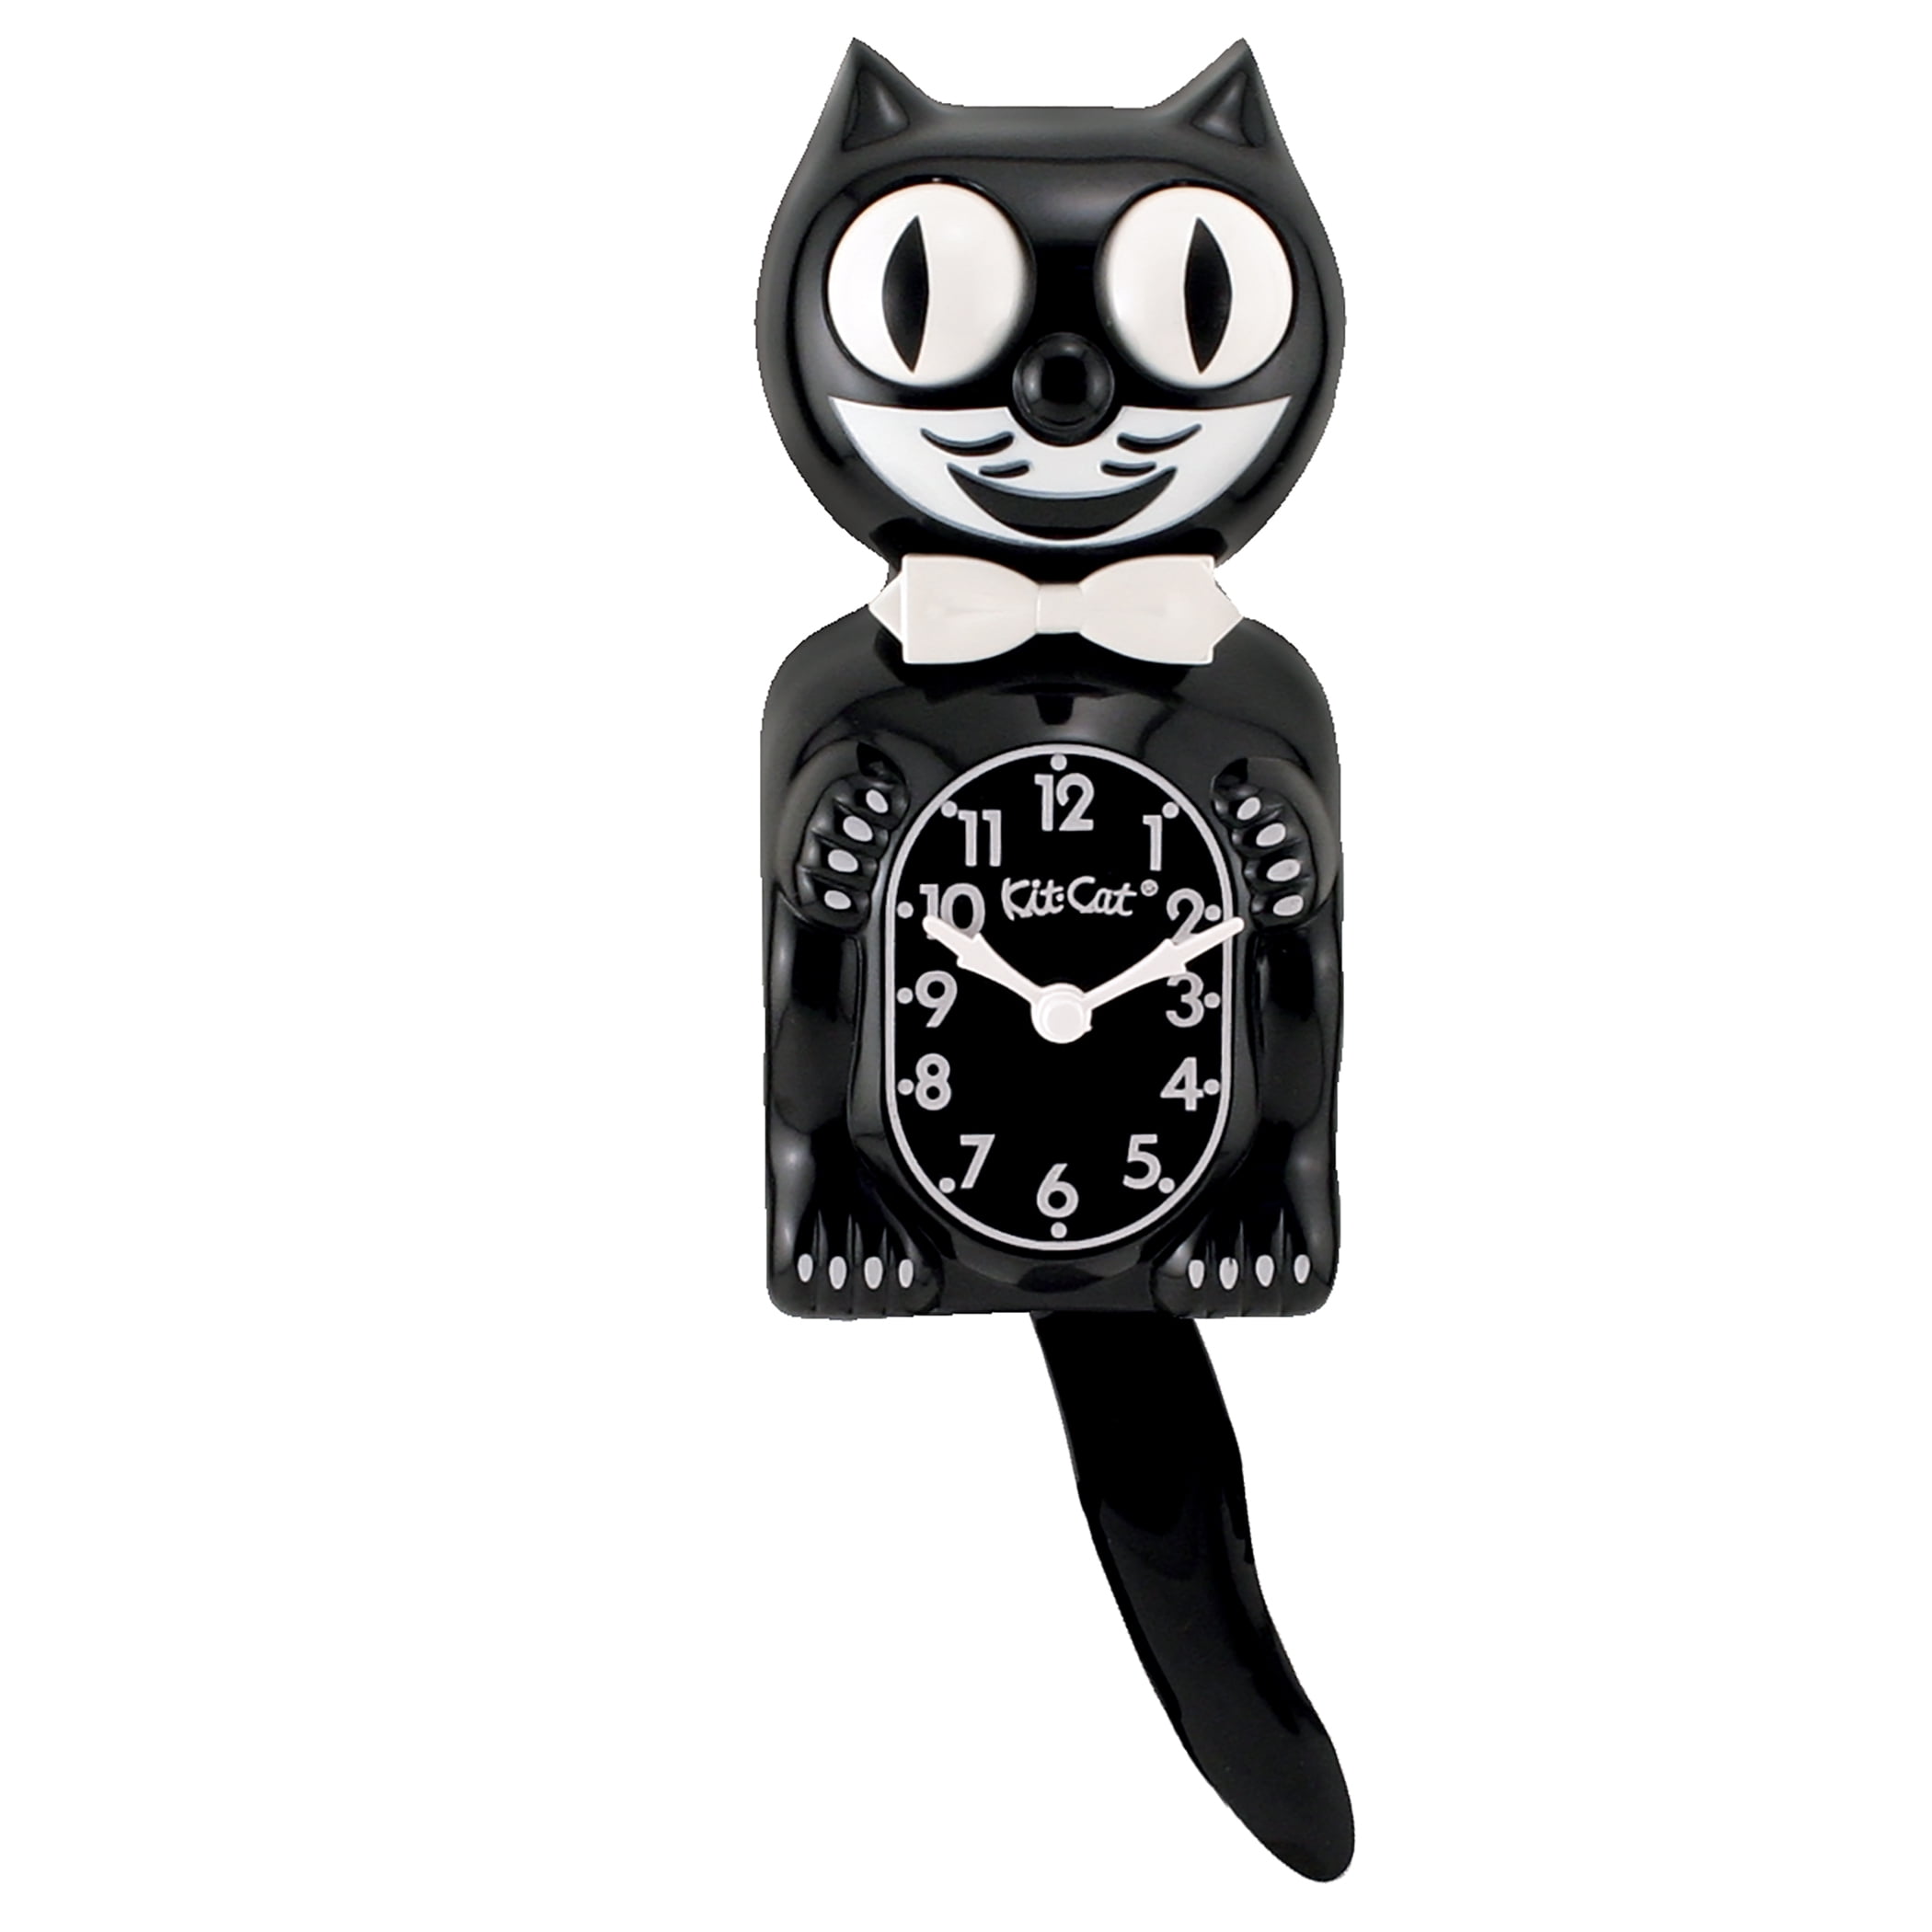 AUTHENTIC BLACK GENTLEMAN Kit Cat Clock,MOVING EYES & TAIL Made USA BOW TIE 